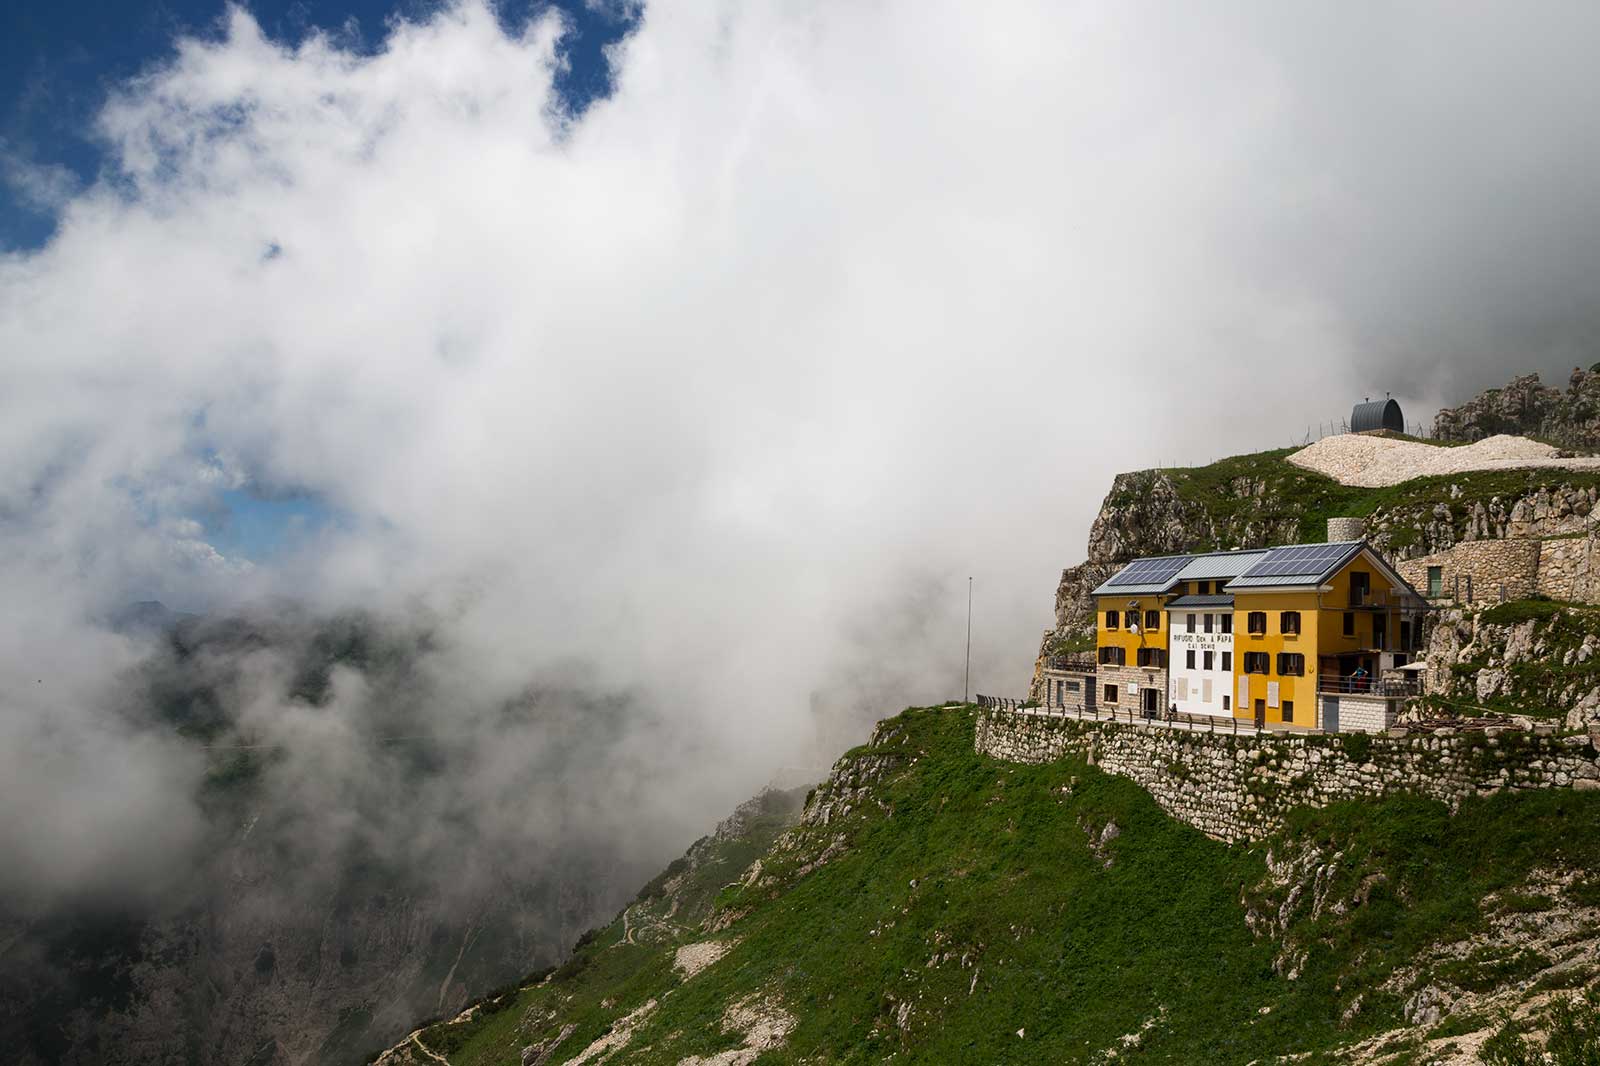 Rifugio Achille Papa is located right at the end of Strada delle 52 Gallerie and a perfect spot for a nice lunch.